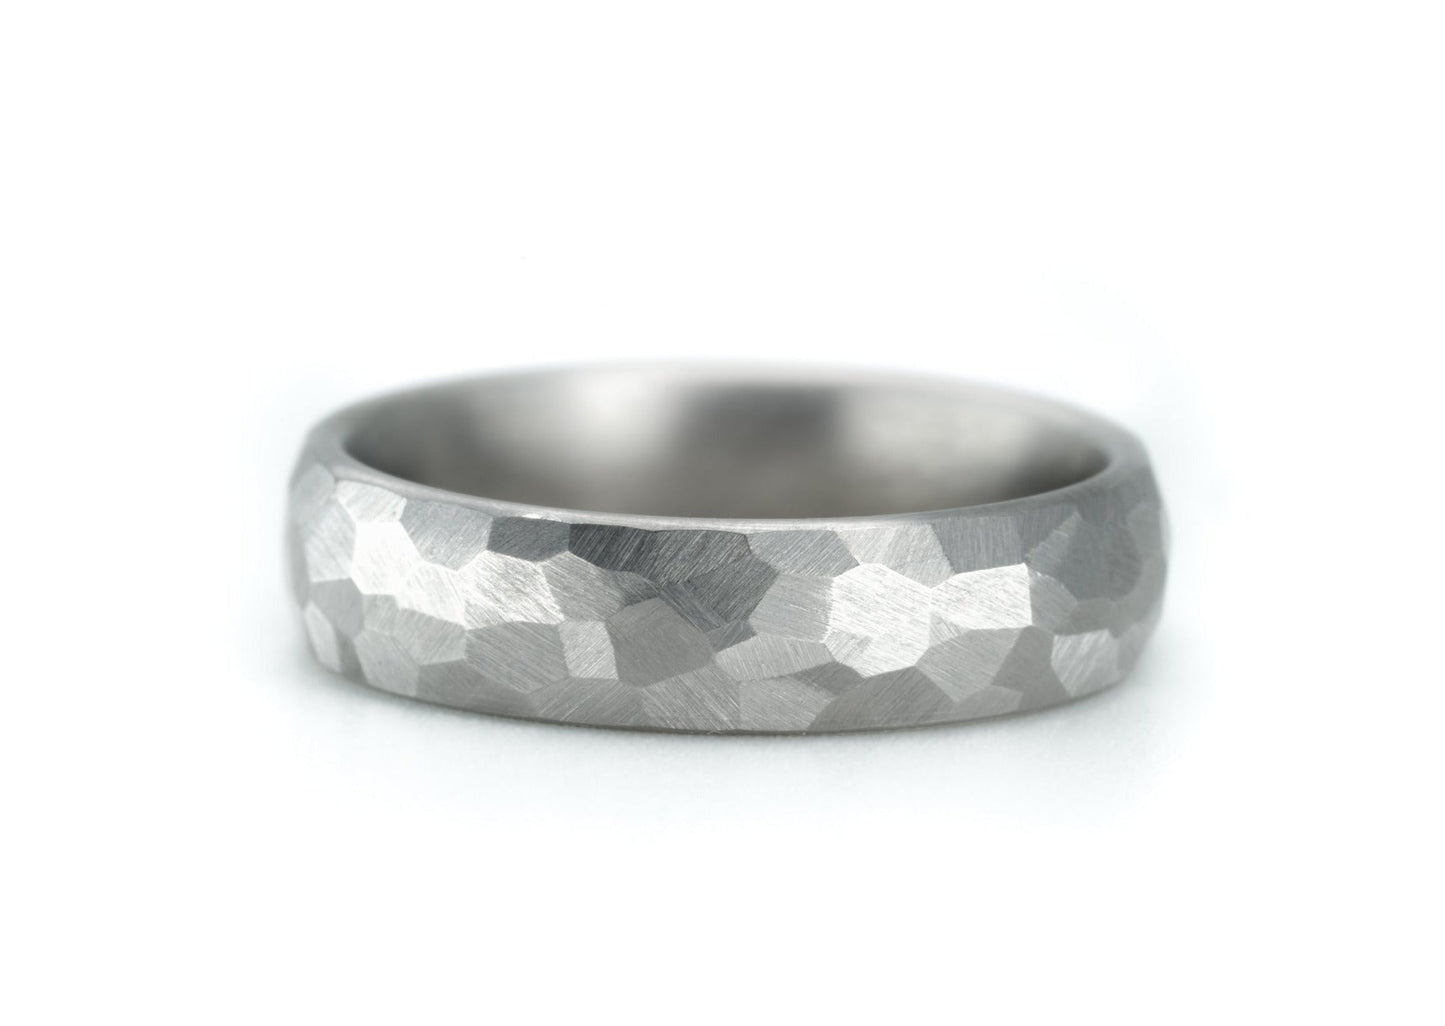 Custom "Charles" Hand-Ground Titanium Ring With Faceted Design